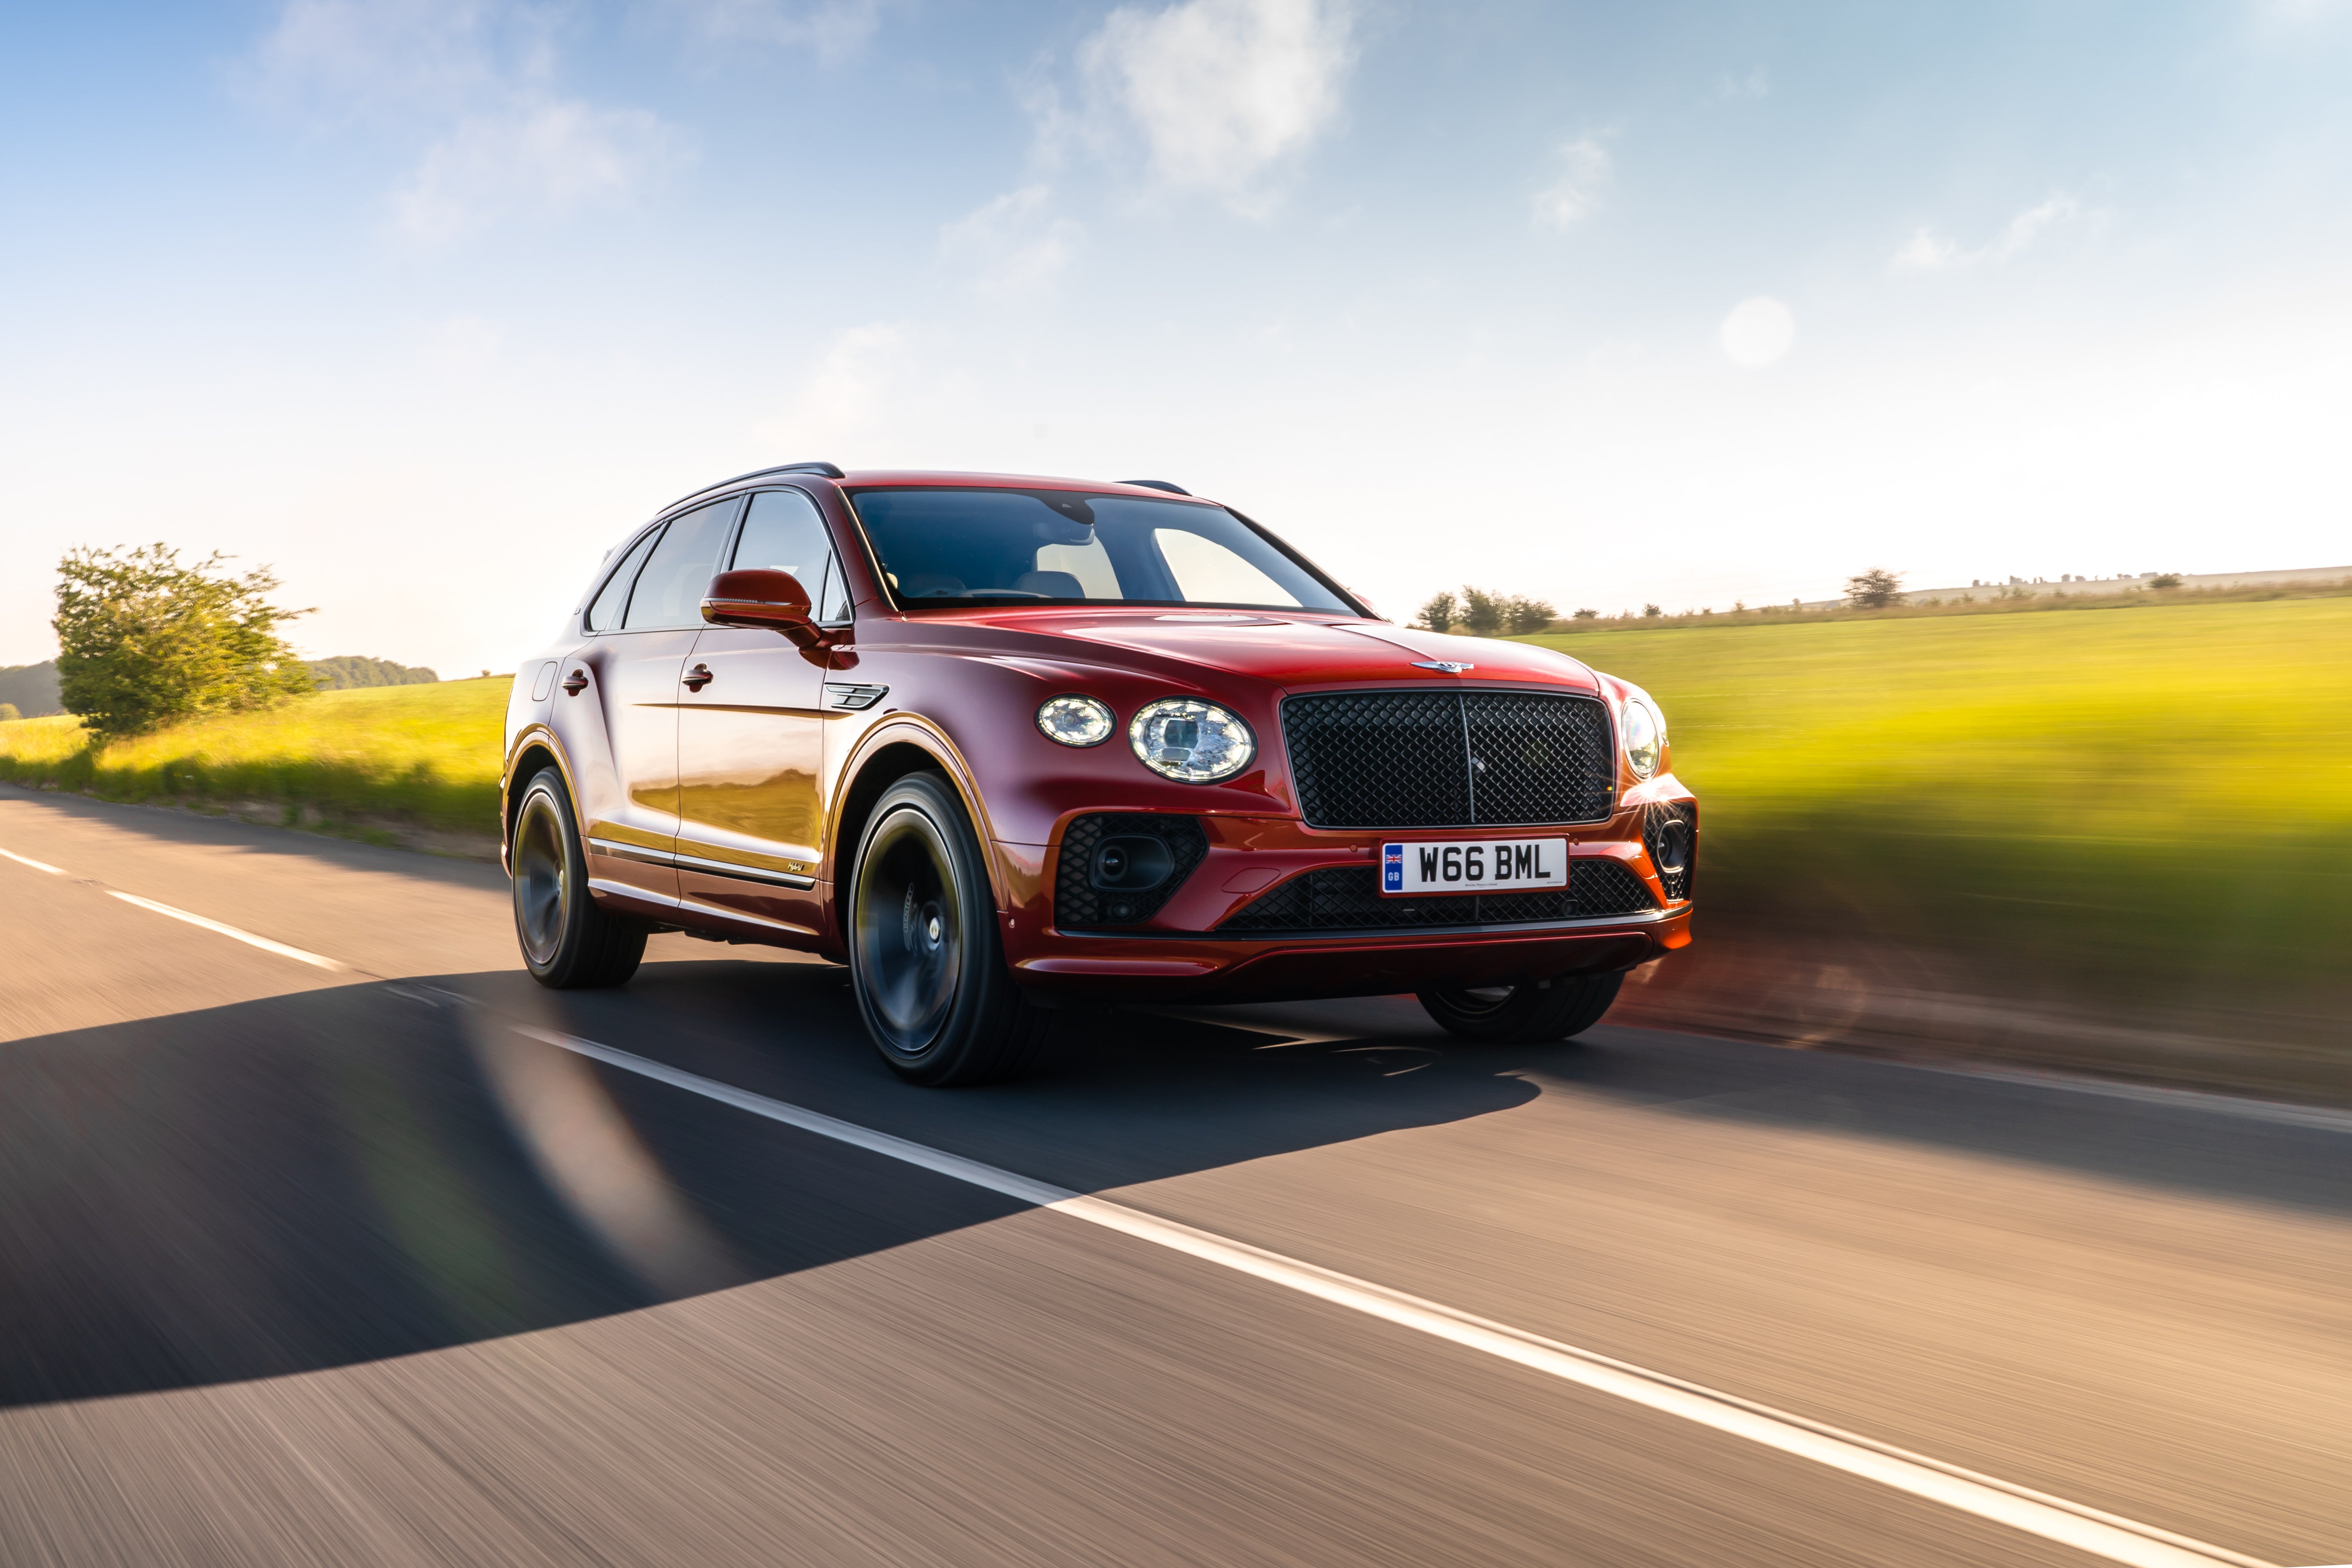 The Bentayga has had a bit of a facelift, with a bolder front